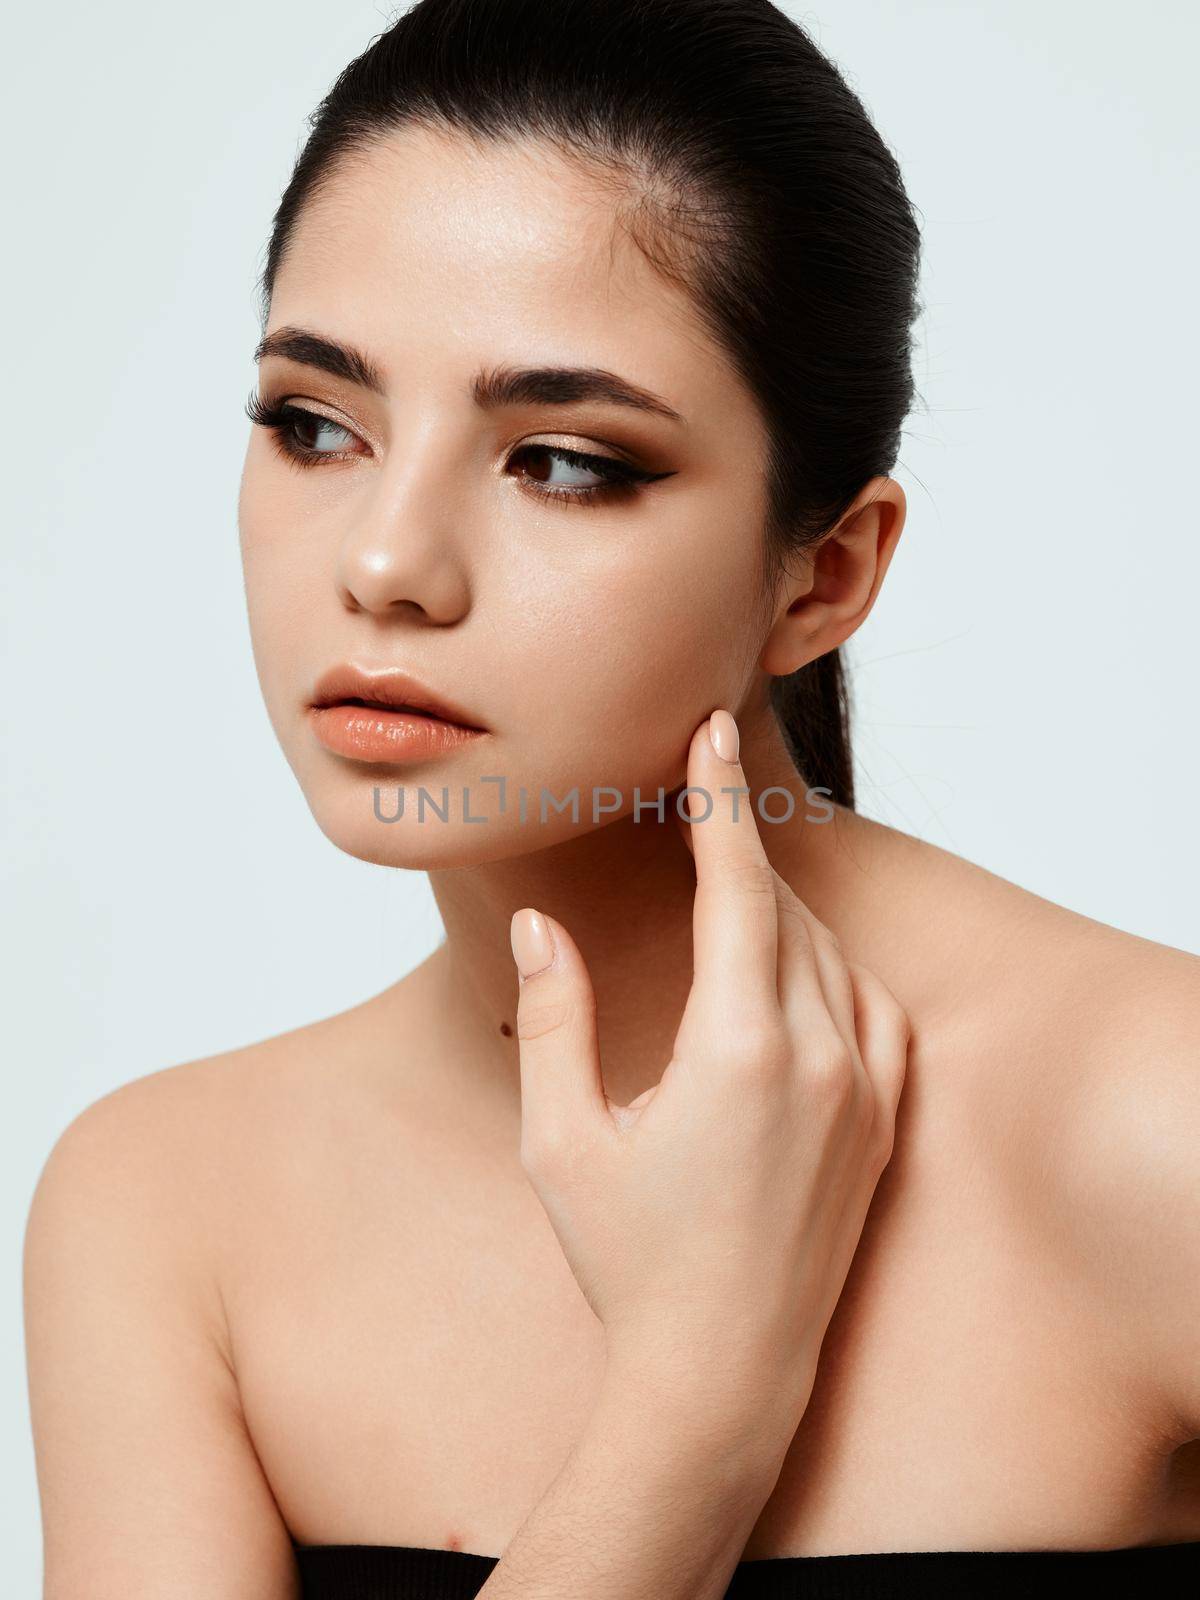 Woman in black dress nude adhesive makeup model hand near face. High quality photo